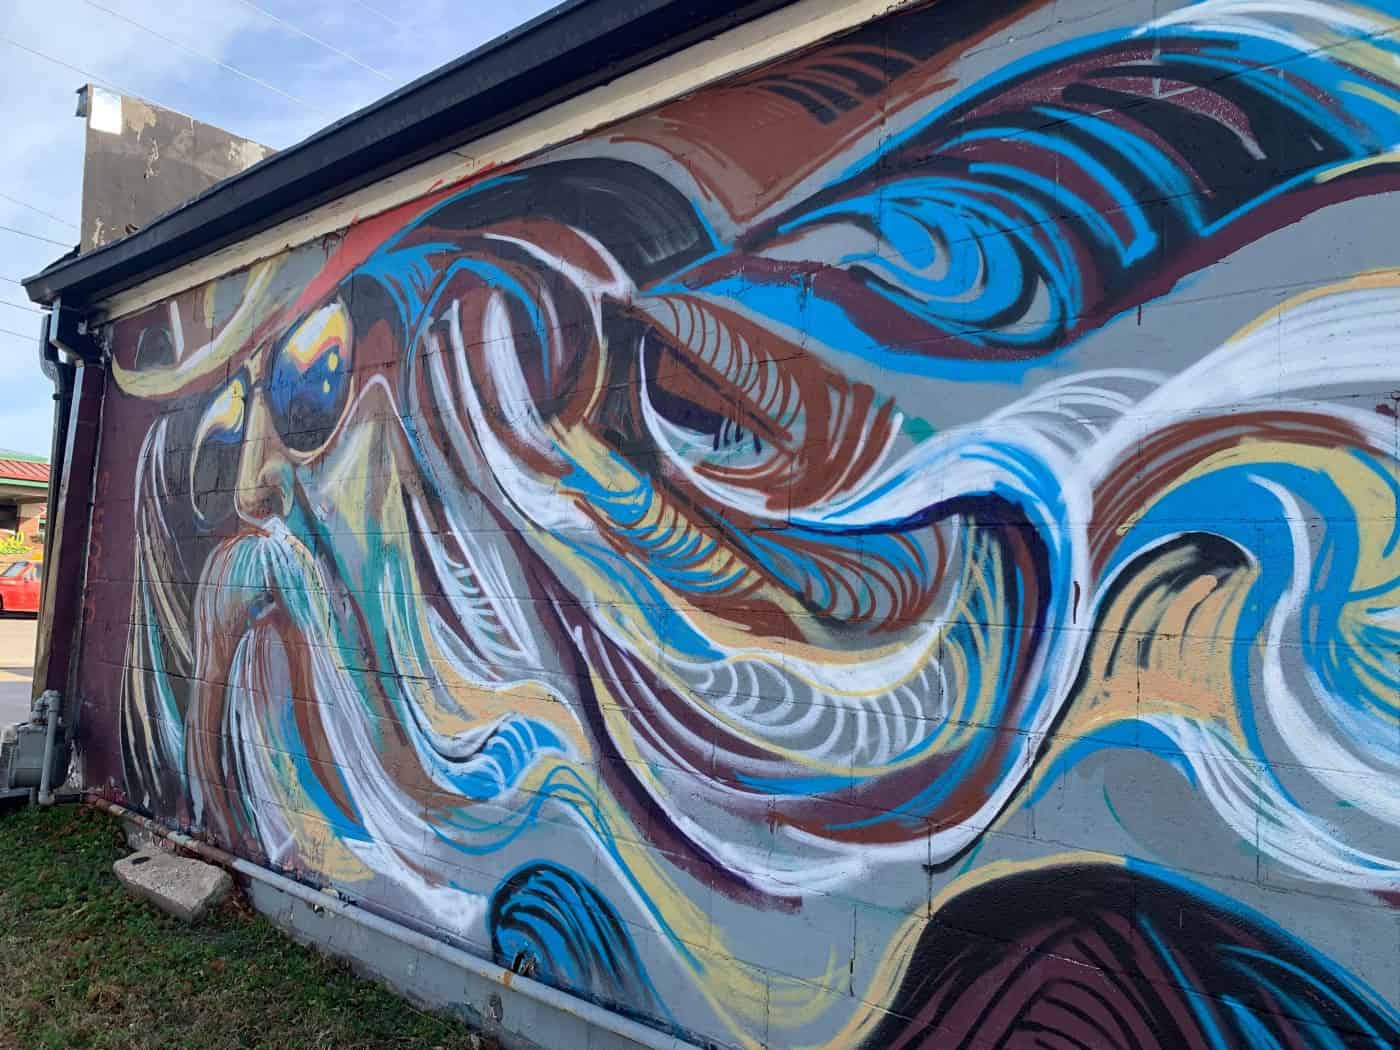 This wall mural of Leon Russell, titled Hail Factor, is located at 1016 E. 4th St. Tulsa’s Jason Sales commissioned local artist Josh Butts to paint it.